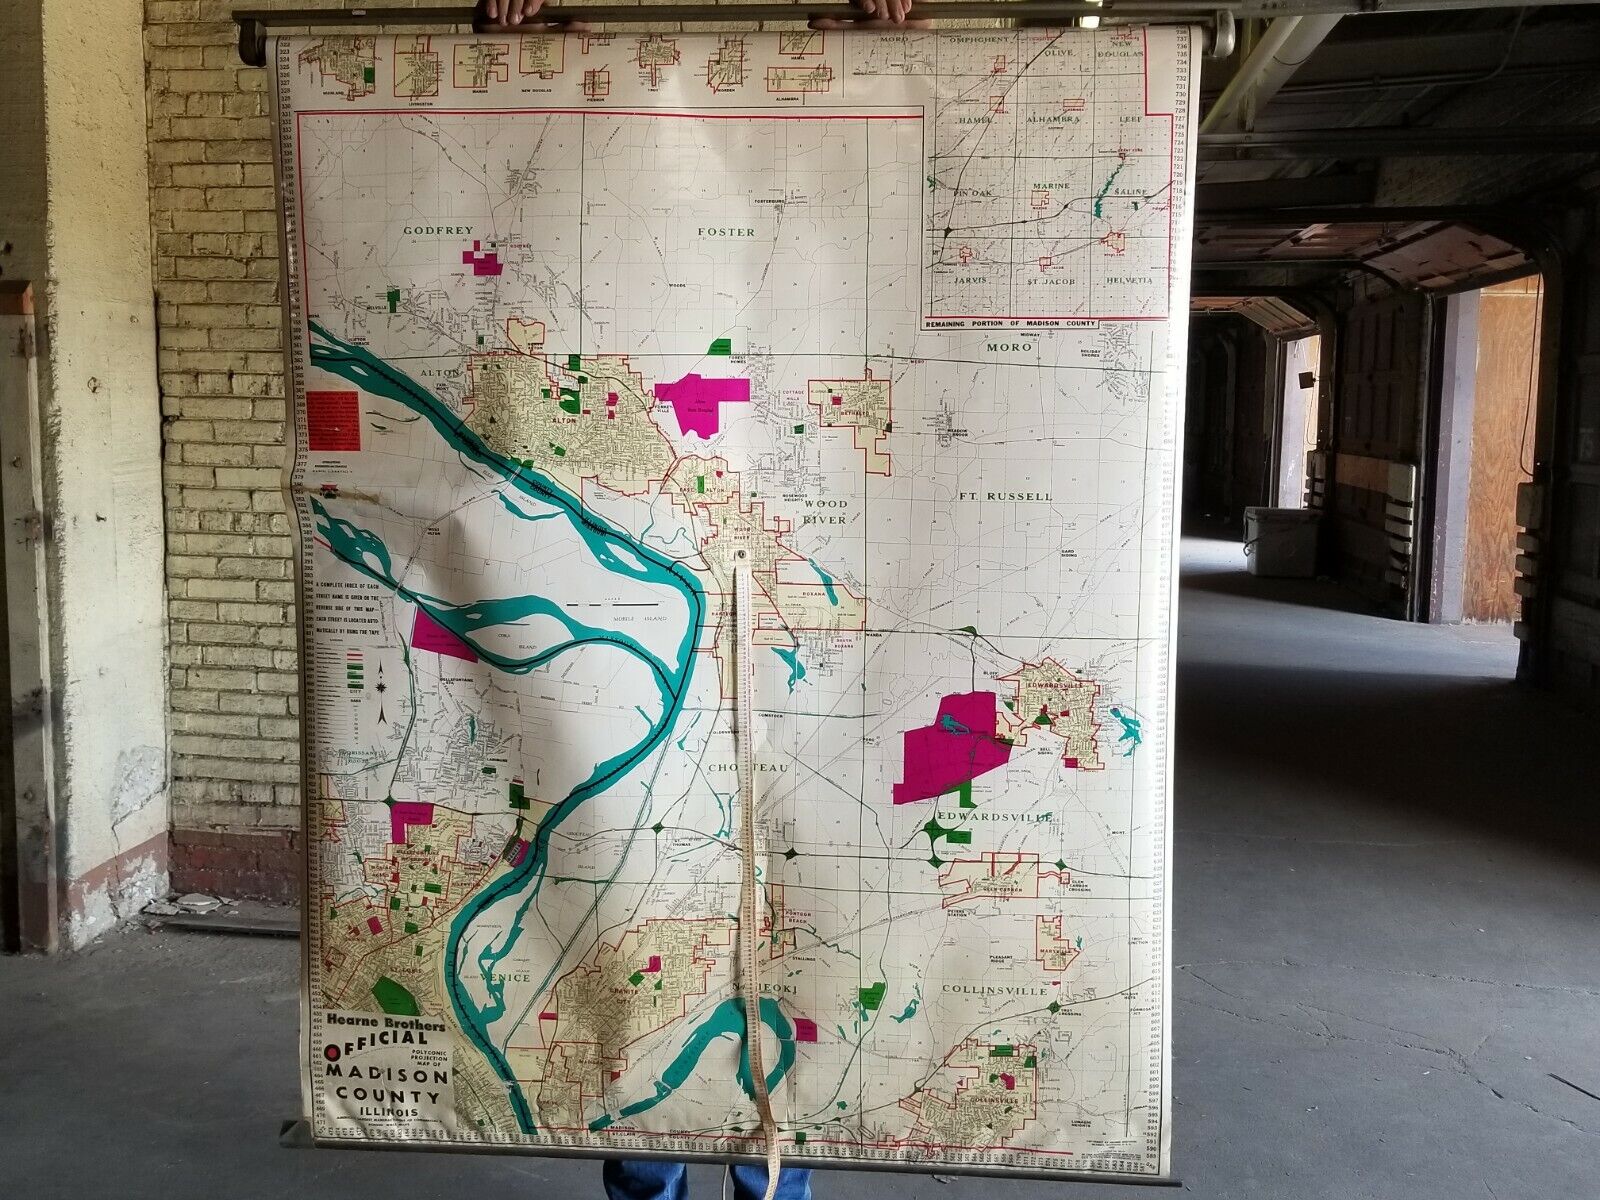 Madison County historical pull down map by Hearne Brothers, vintage